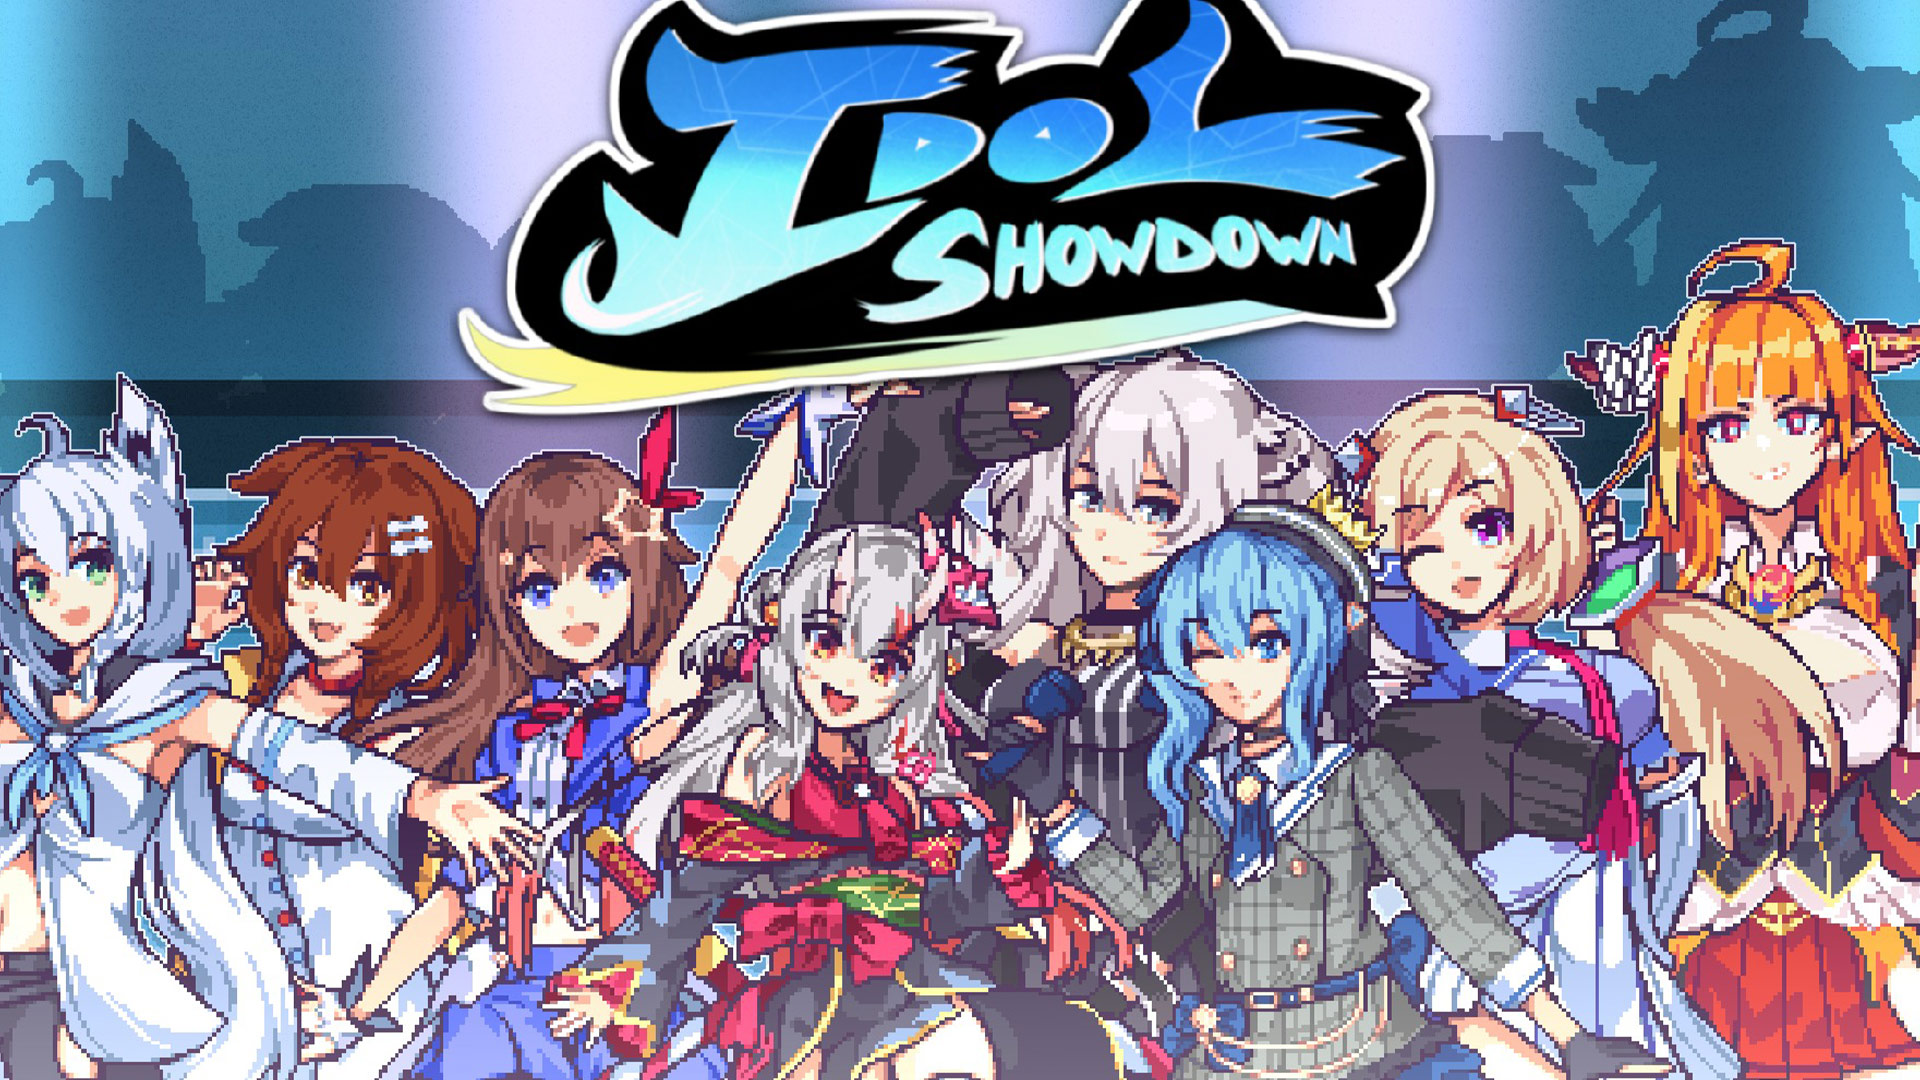 The Idol Showdown FanMade Fighting Game Is A Huge Love Letter To The